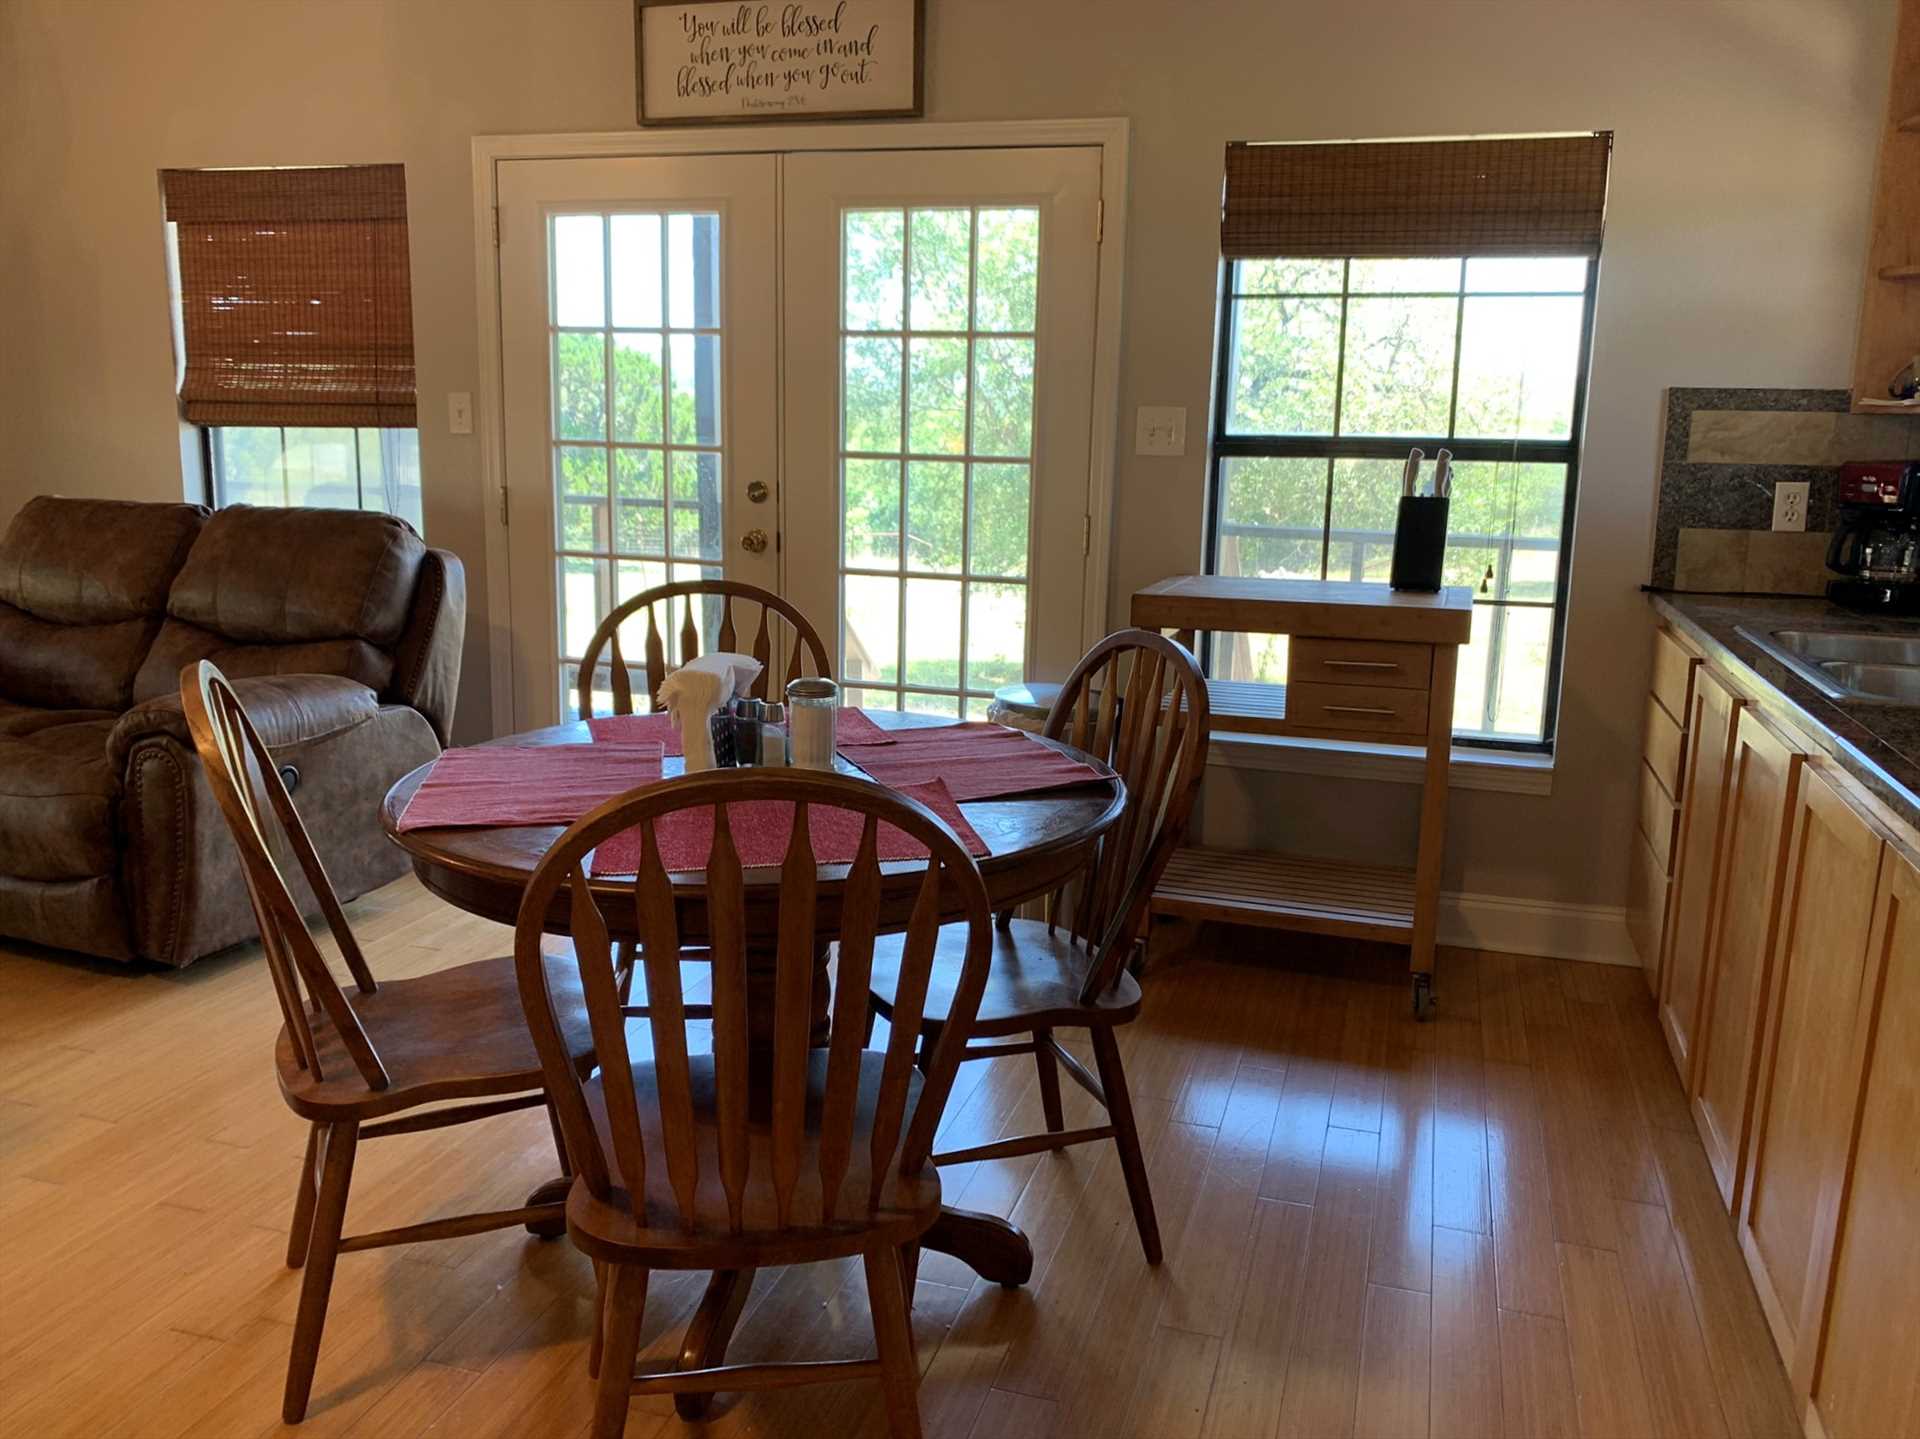                                                 Seating up to four, the dining room table is positioned right by windows and French doors for a beautiful view of the great outdoors.